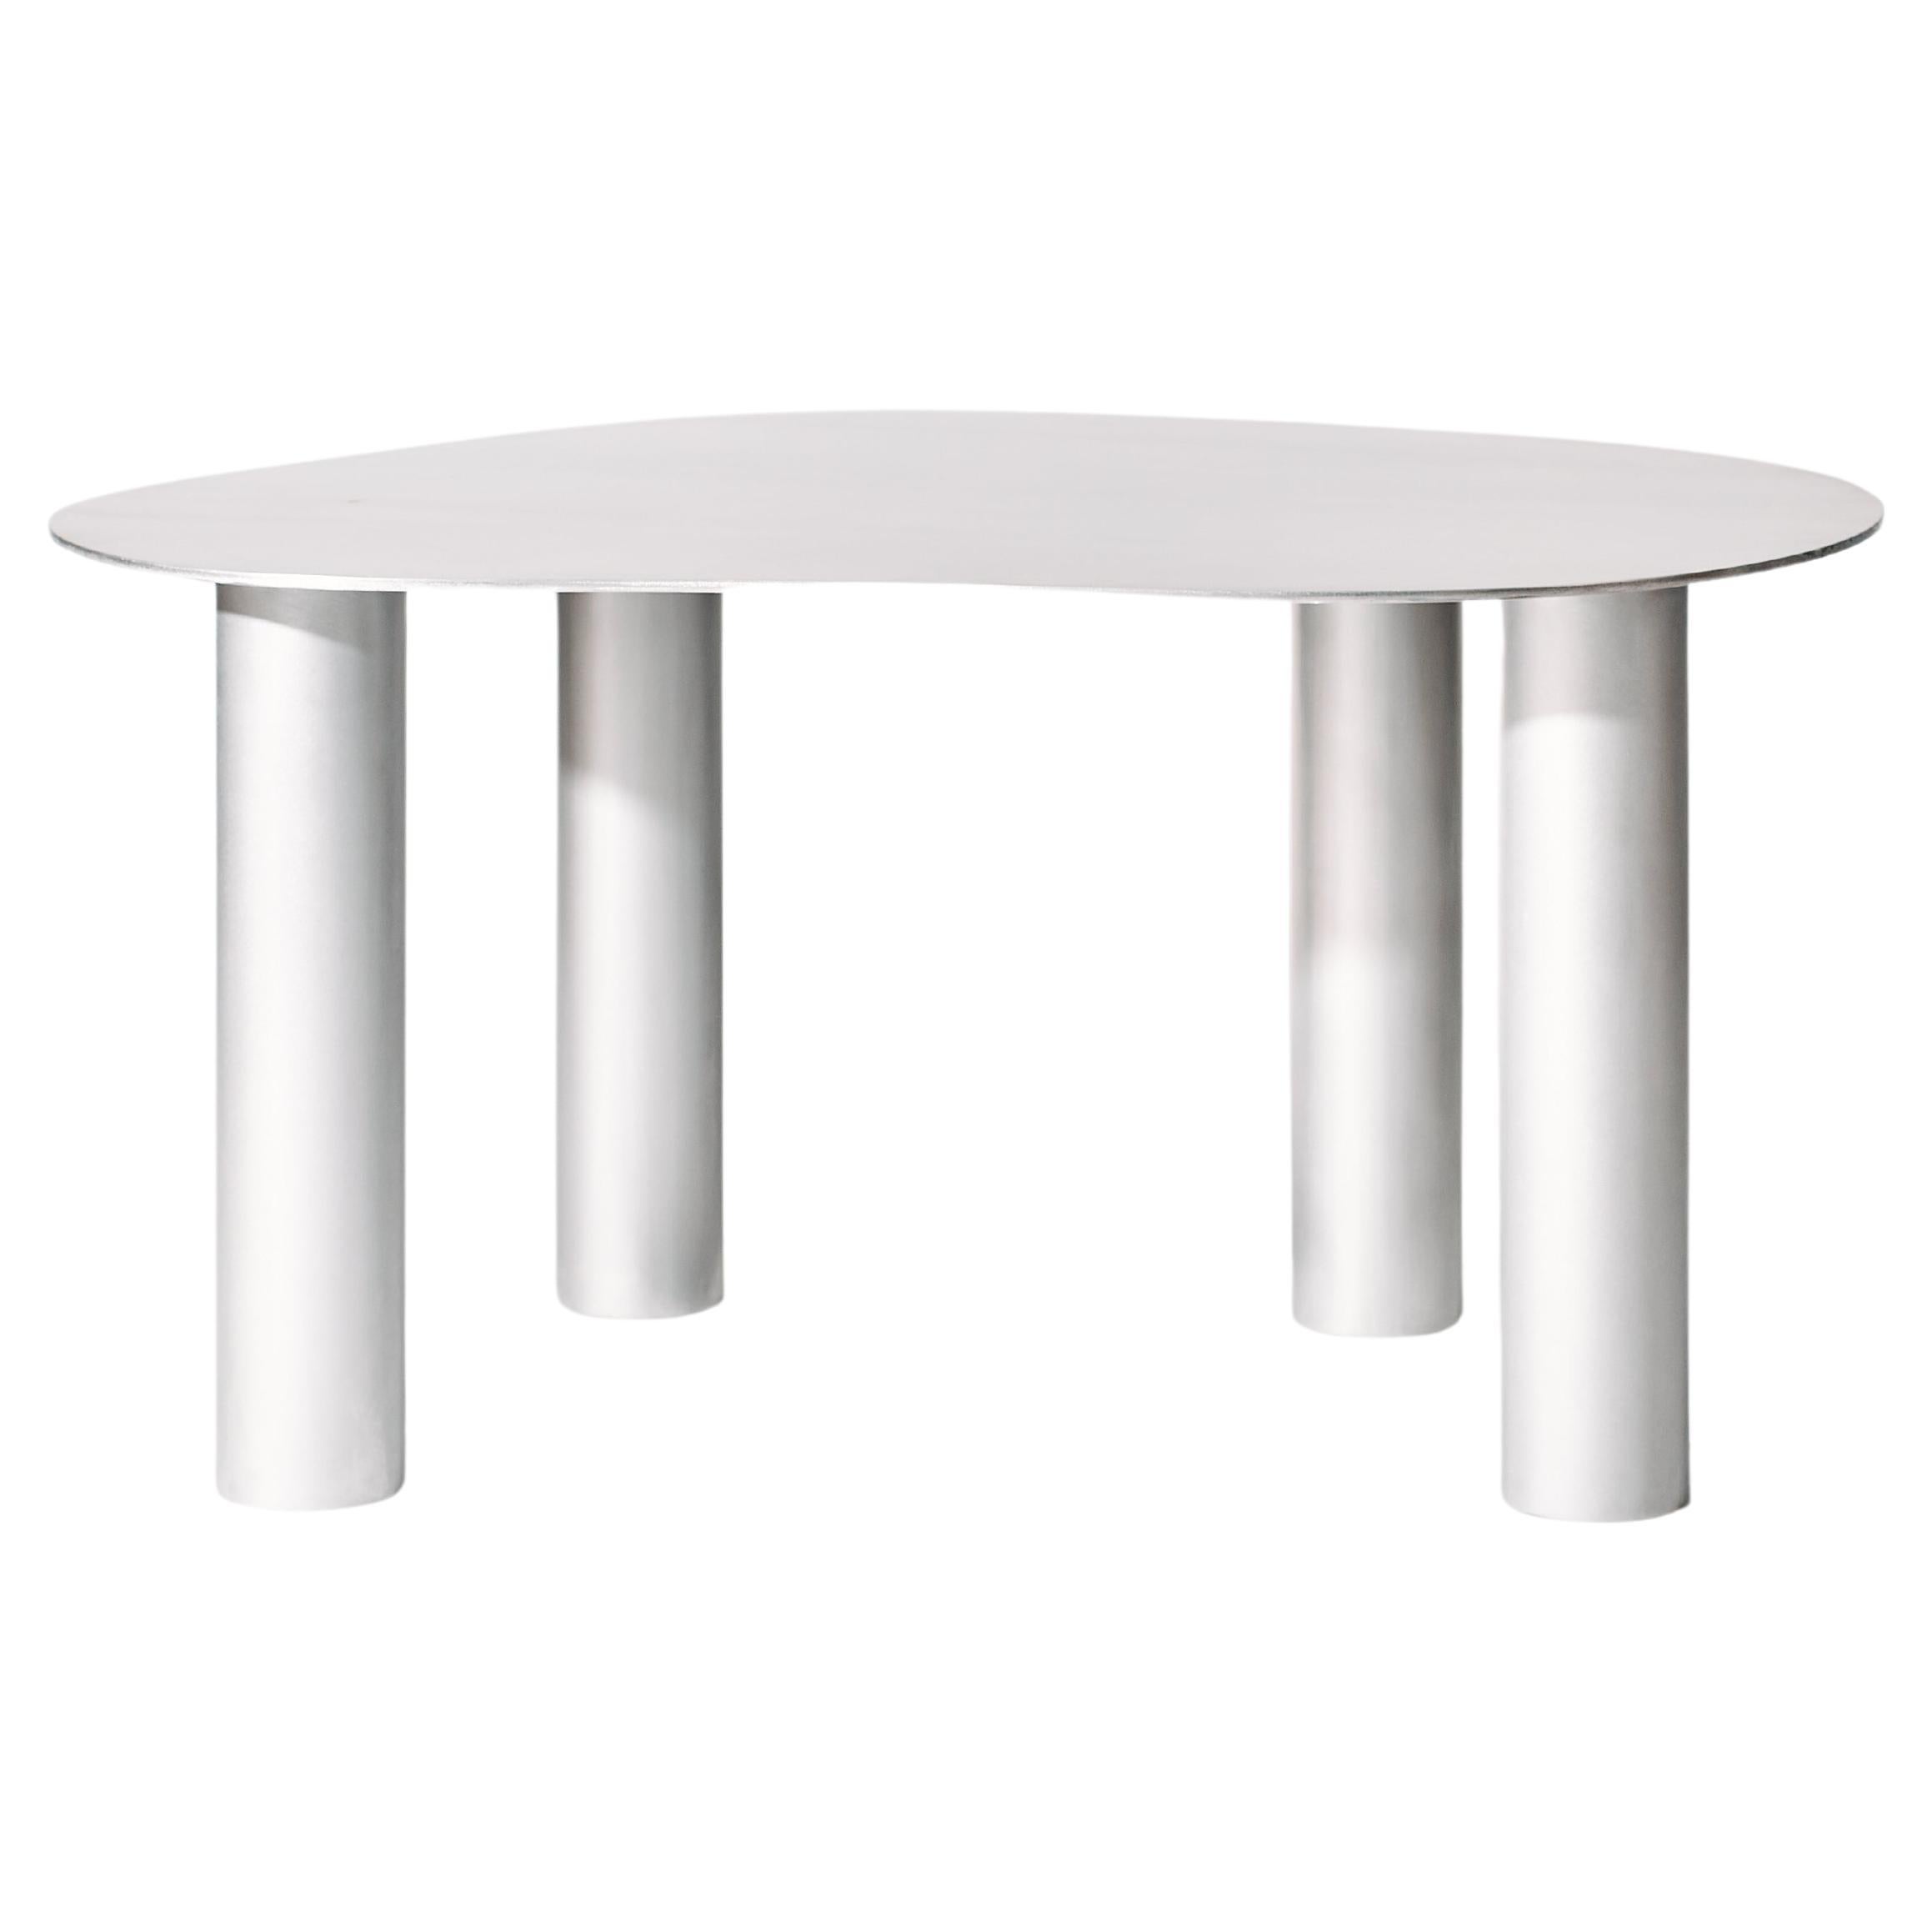 The Puddle Table Collection - Dining Height Aluminum Table with Cylinder legs